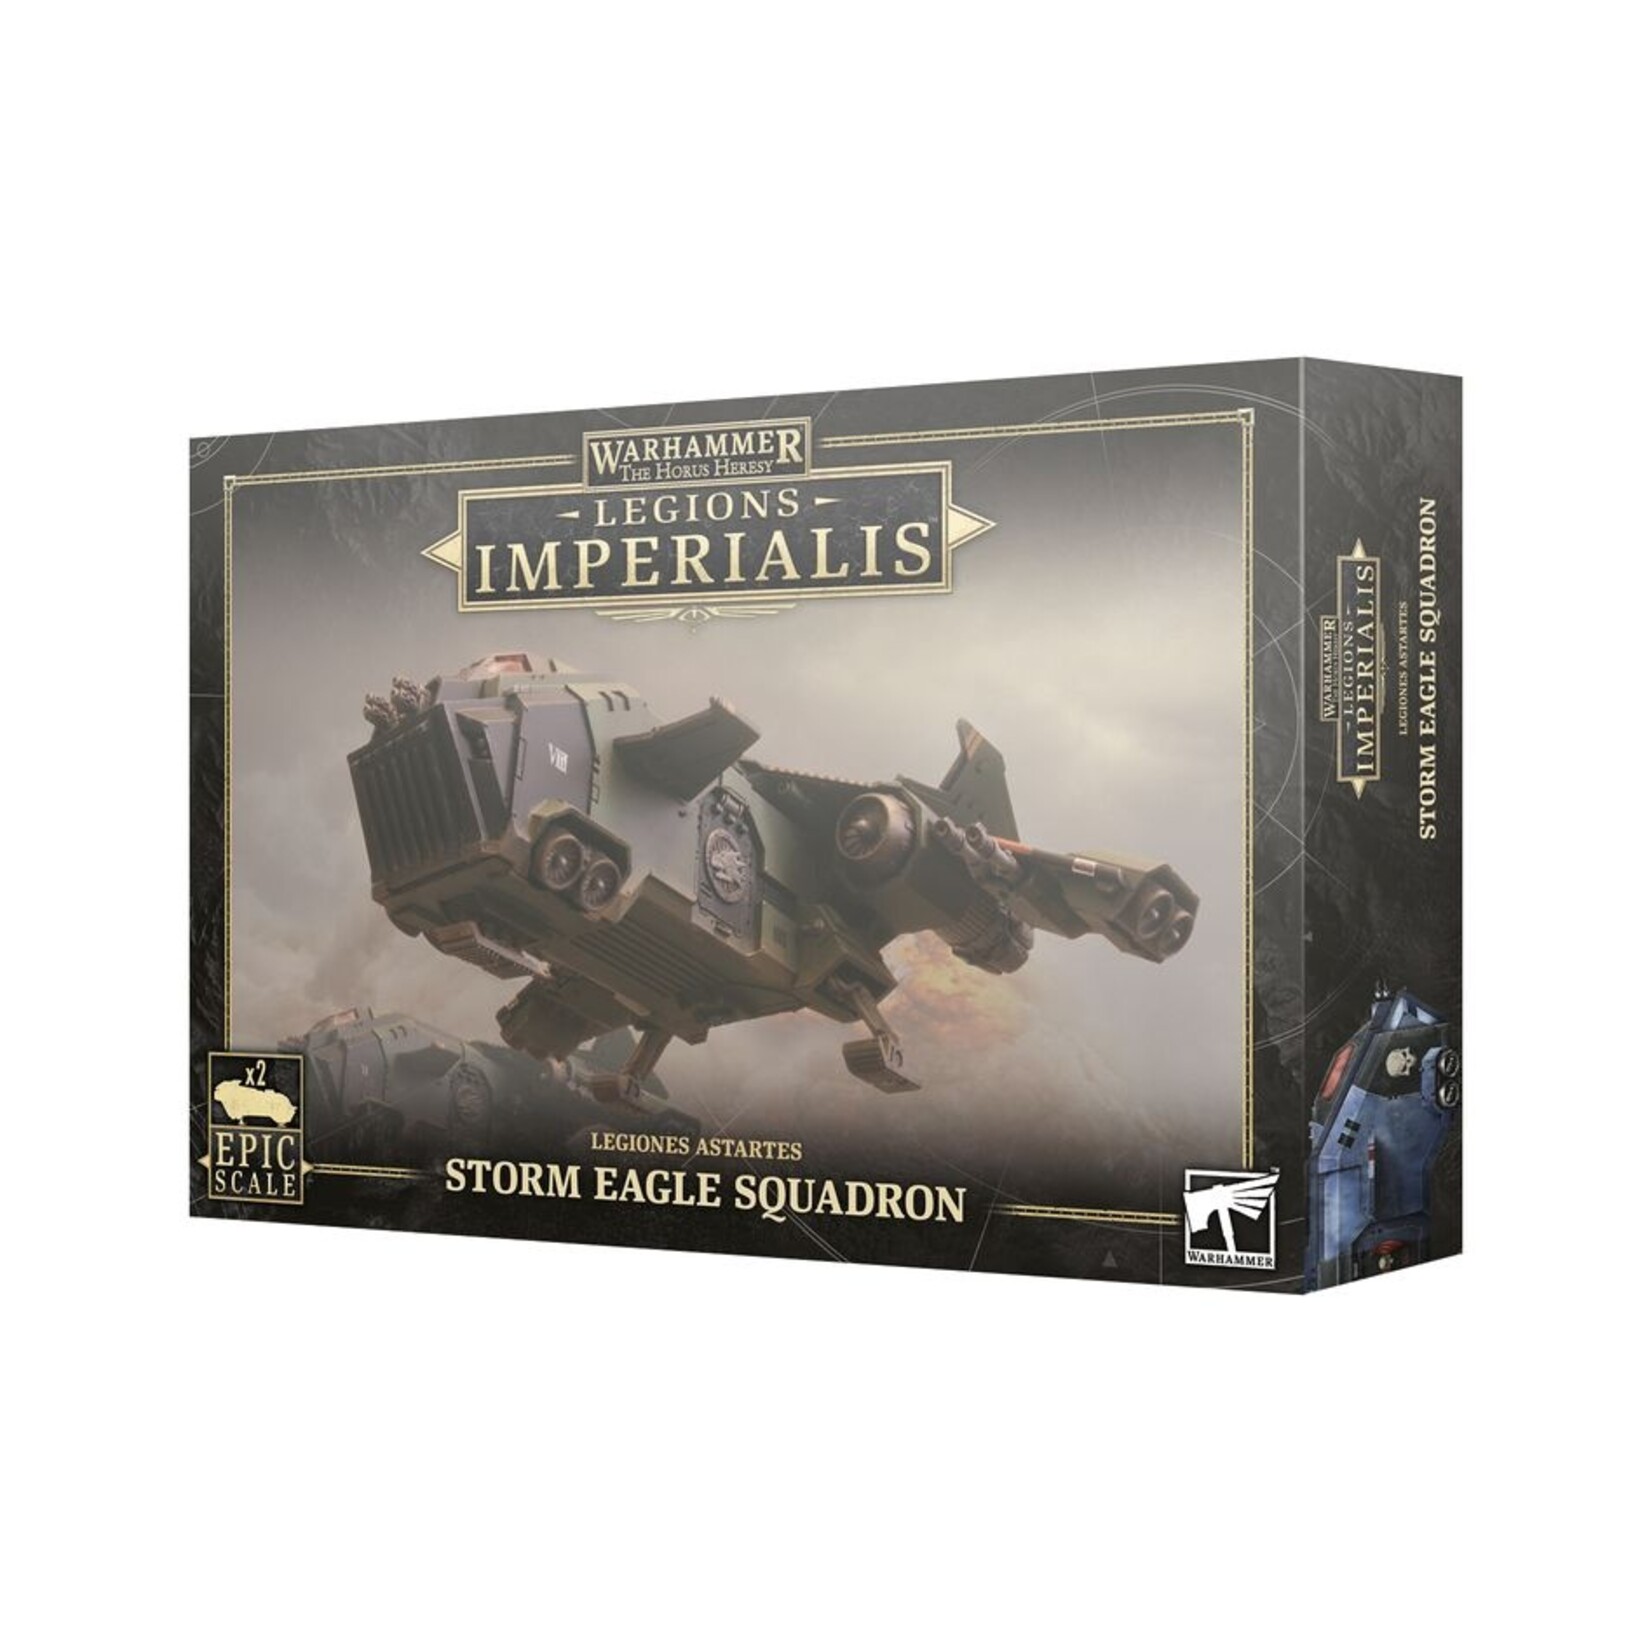 Warhammer: Legions Imperialis (Preorder: releases 29/06) Legions Imperialis: Storm Eagle Squadron